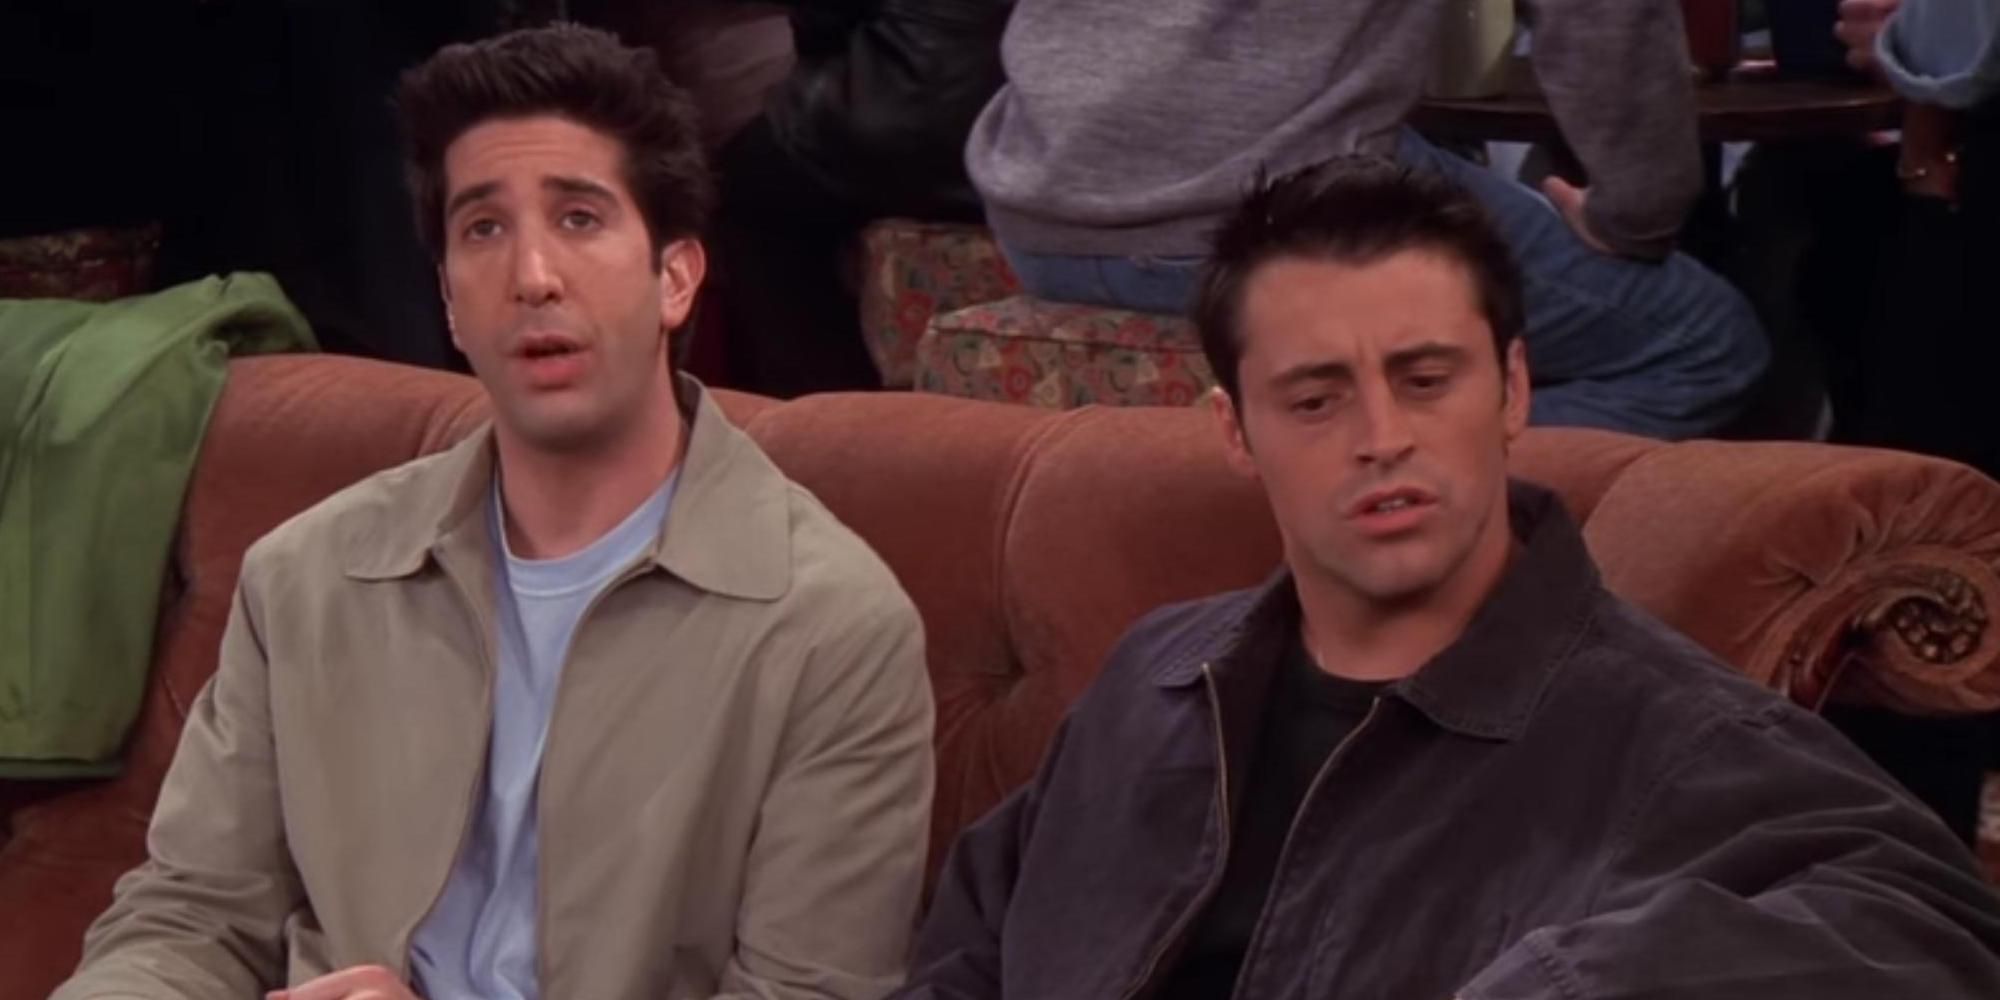 Ross (David Schwimmer) & Joey (Matt LeBlanc) sitting on the couch at Central Perk in Friends season 5, episode 20 "The One with the Ride-Along."